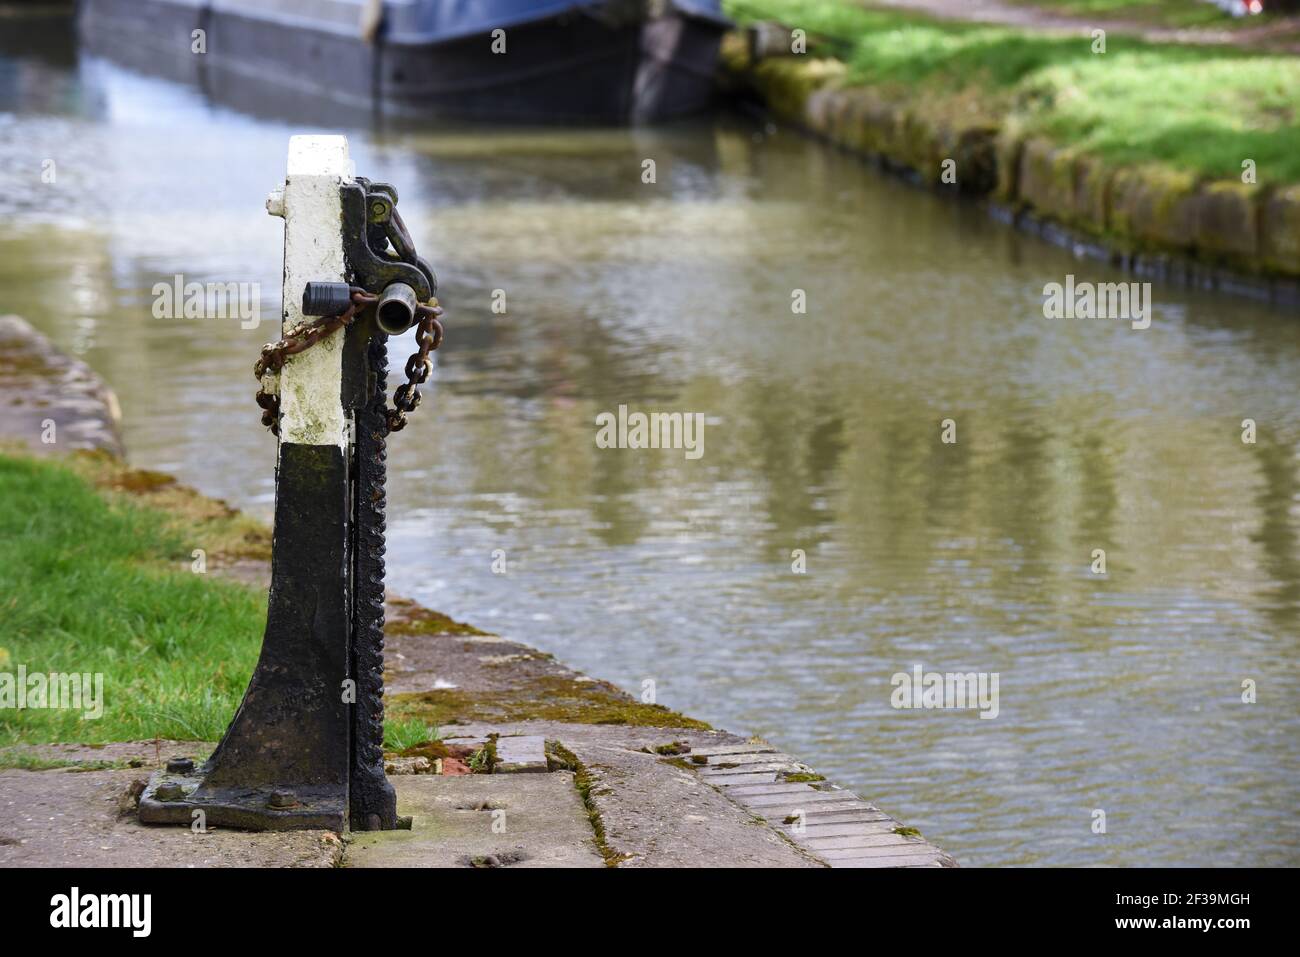 Sluice gate control for flood prevention on canal tow path Stock Photo